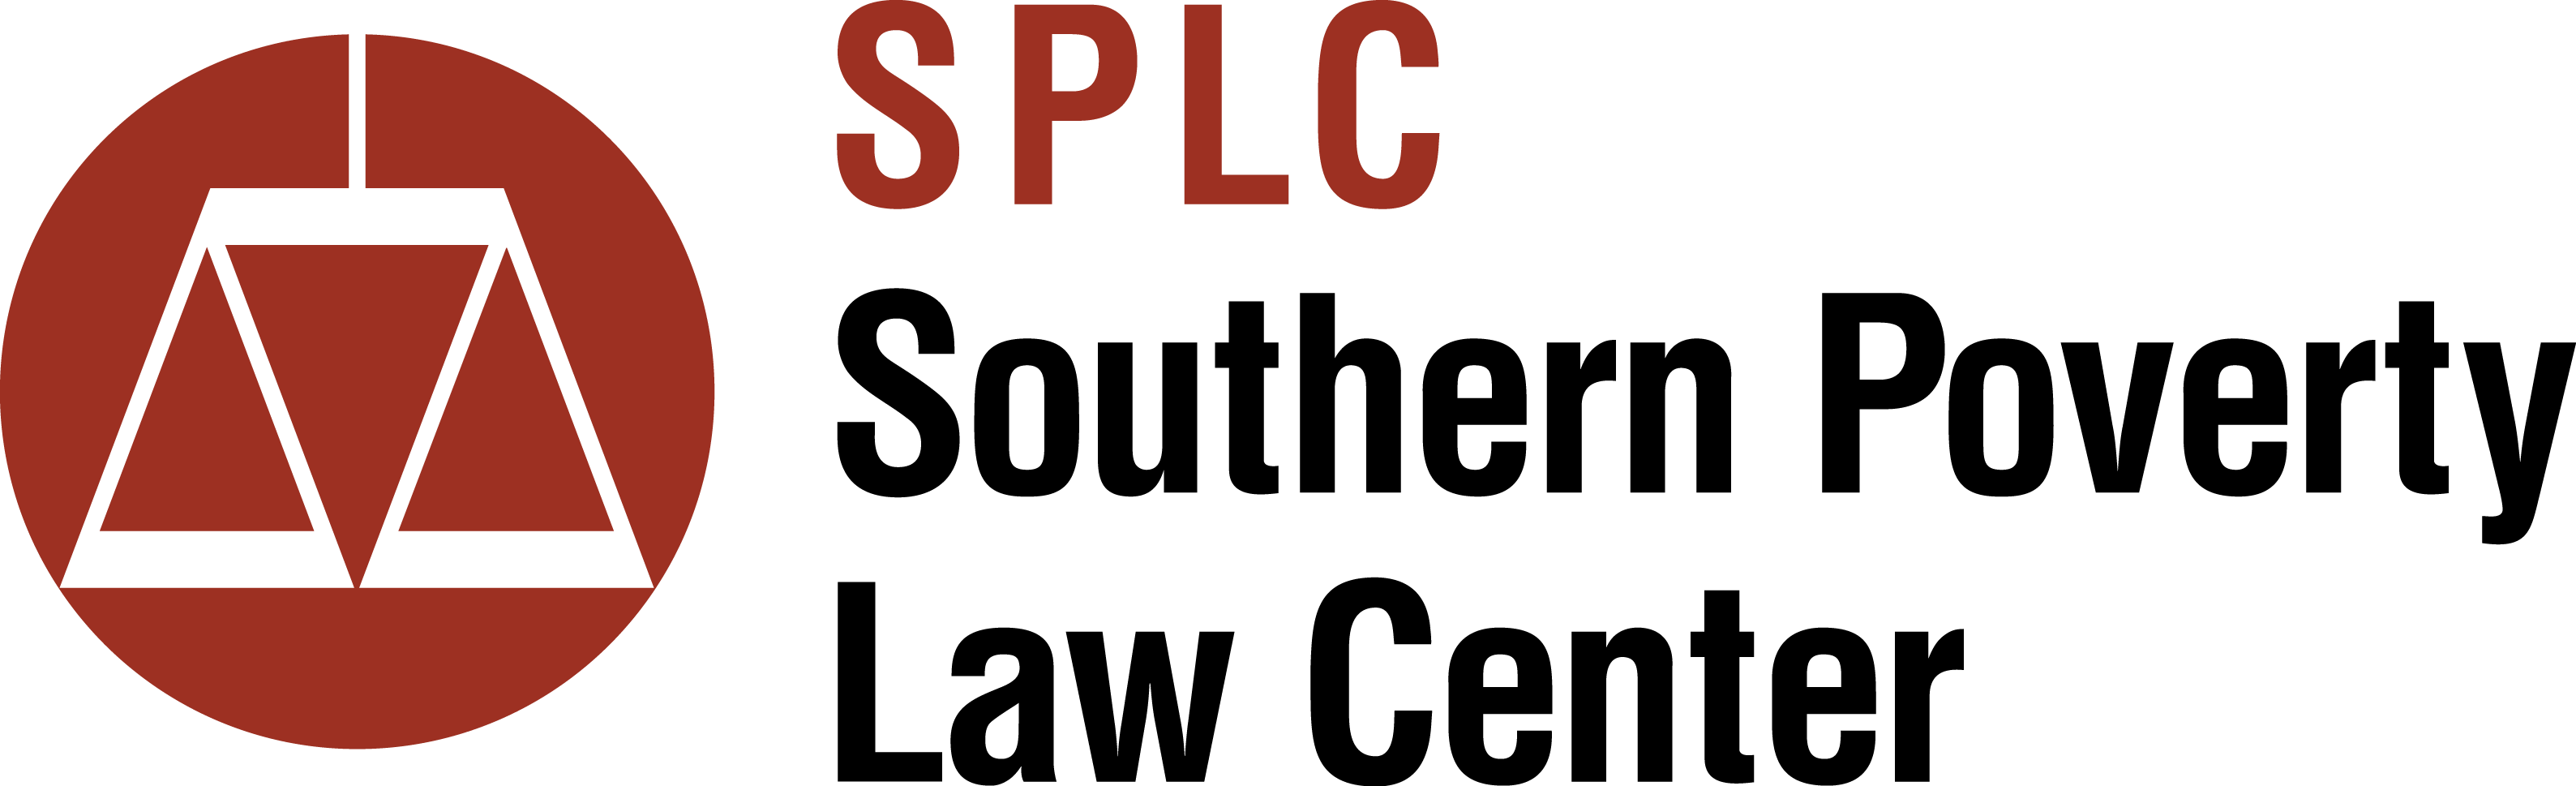 Logo of Southern Poverty Law Centre